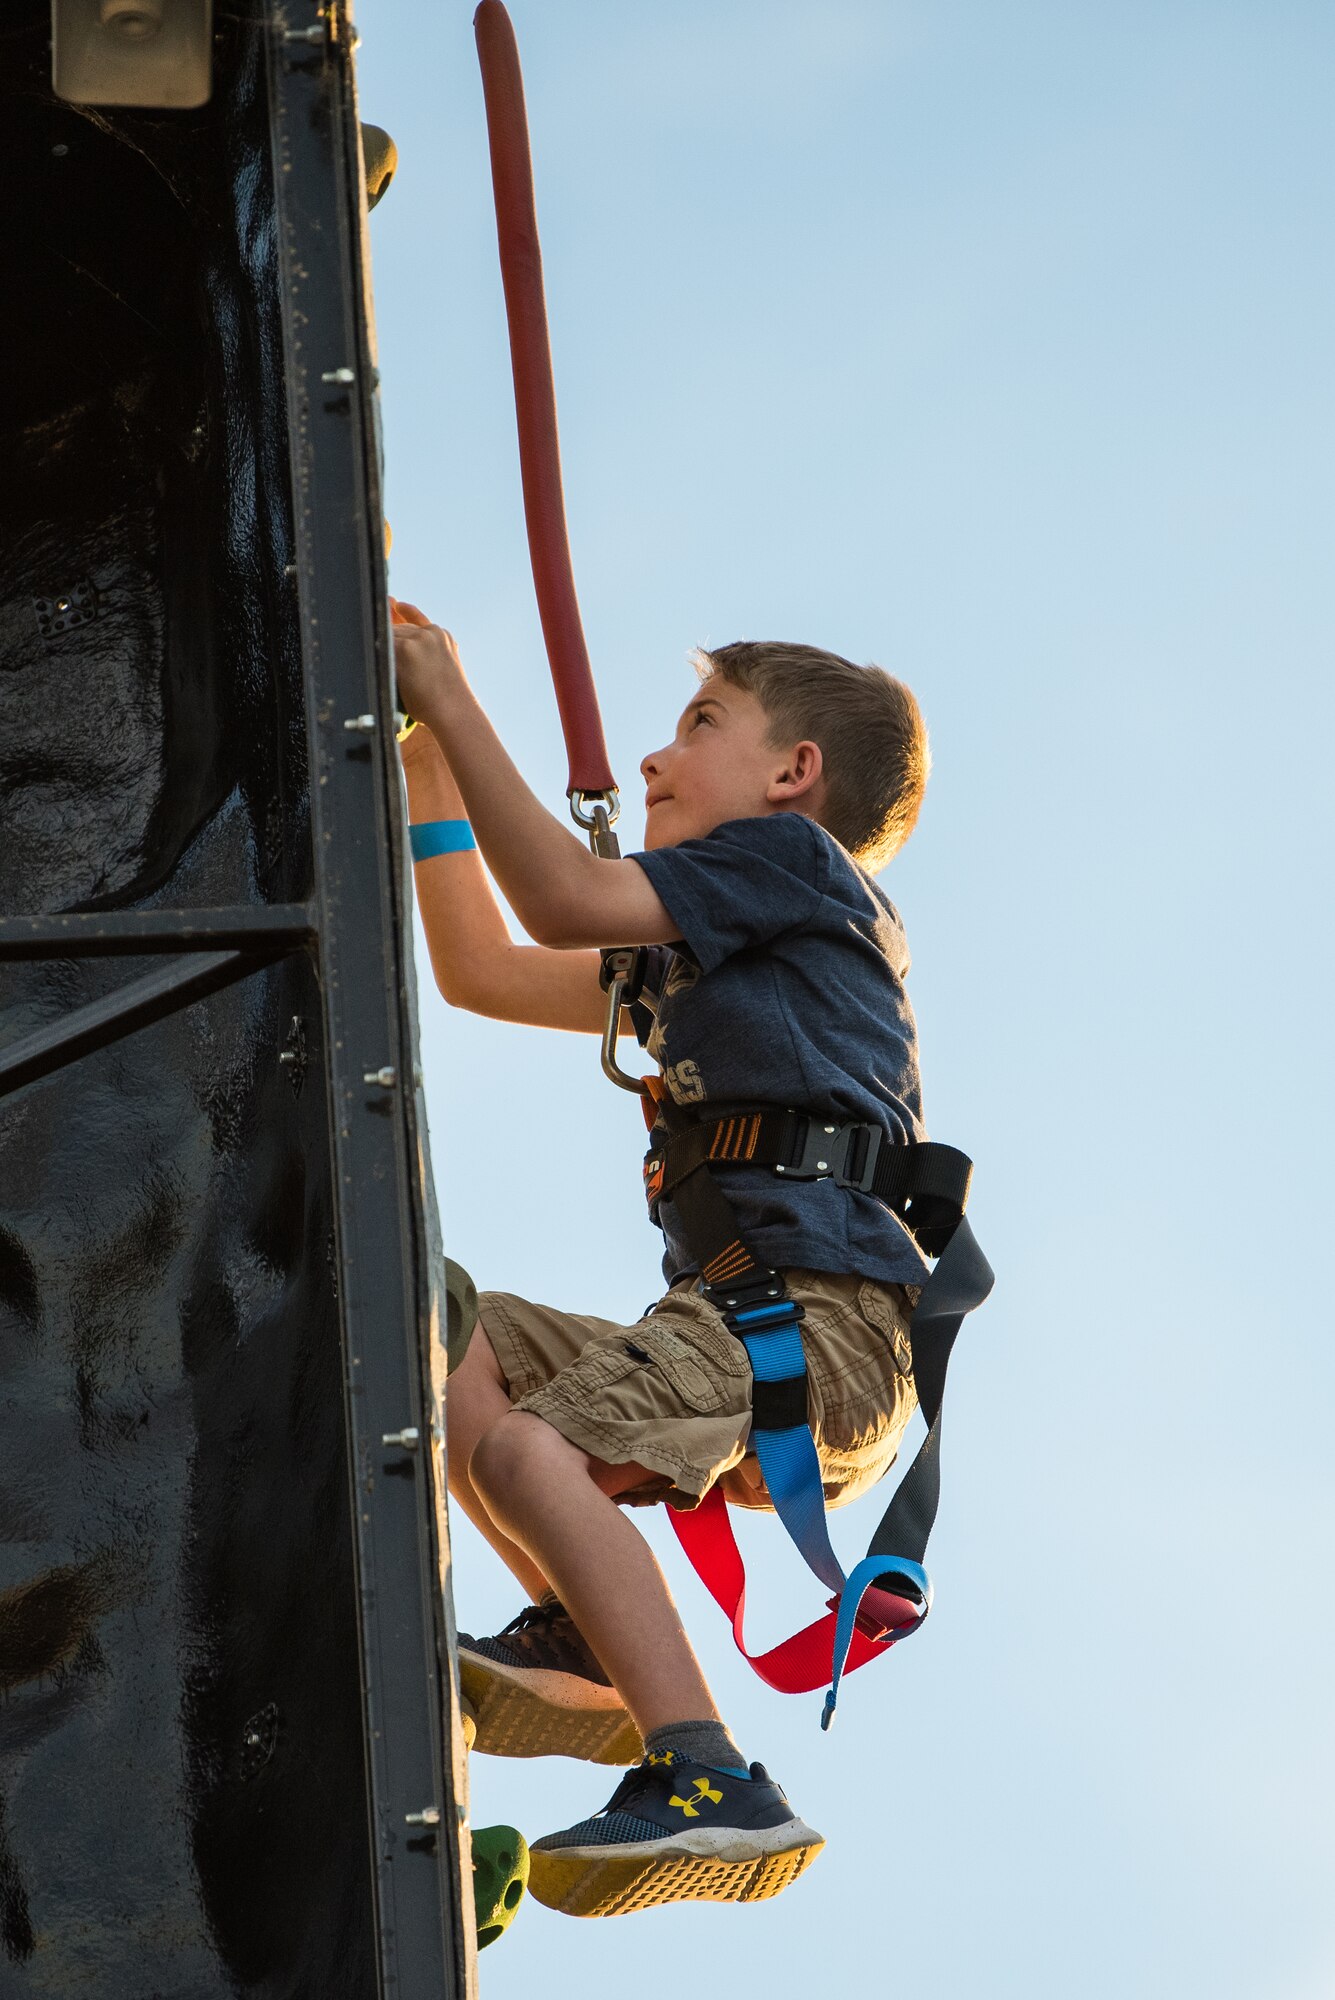 A child climbs up a rock wall prior to an Intel drone light show at Travis Air Force Base, Calif., July 5, 2018. The event featured numerous activities including music, bounce houses and an eight minute light show with 500 drones. (U.S. Air Force photo by Master Sgt. Joey Swafford)